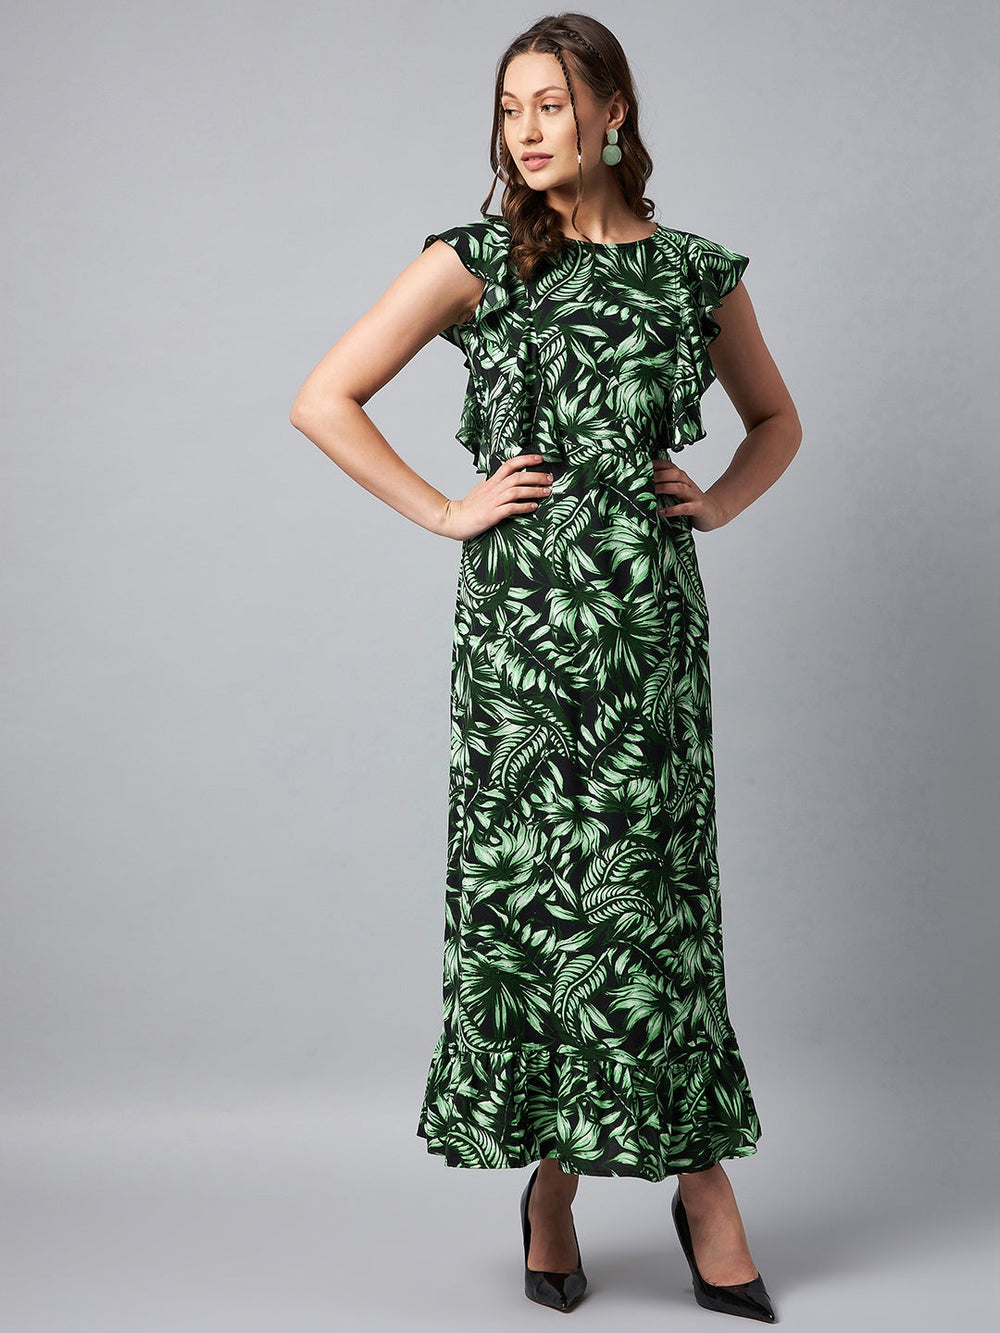 Green-&-Black-Polyester-Puff-Sleeve-Smock-Floral-Maxi-Dress